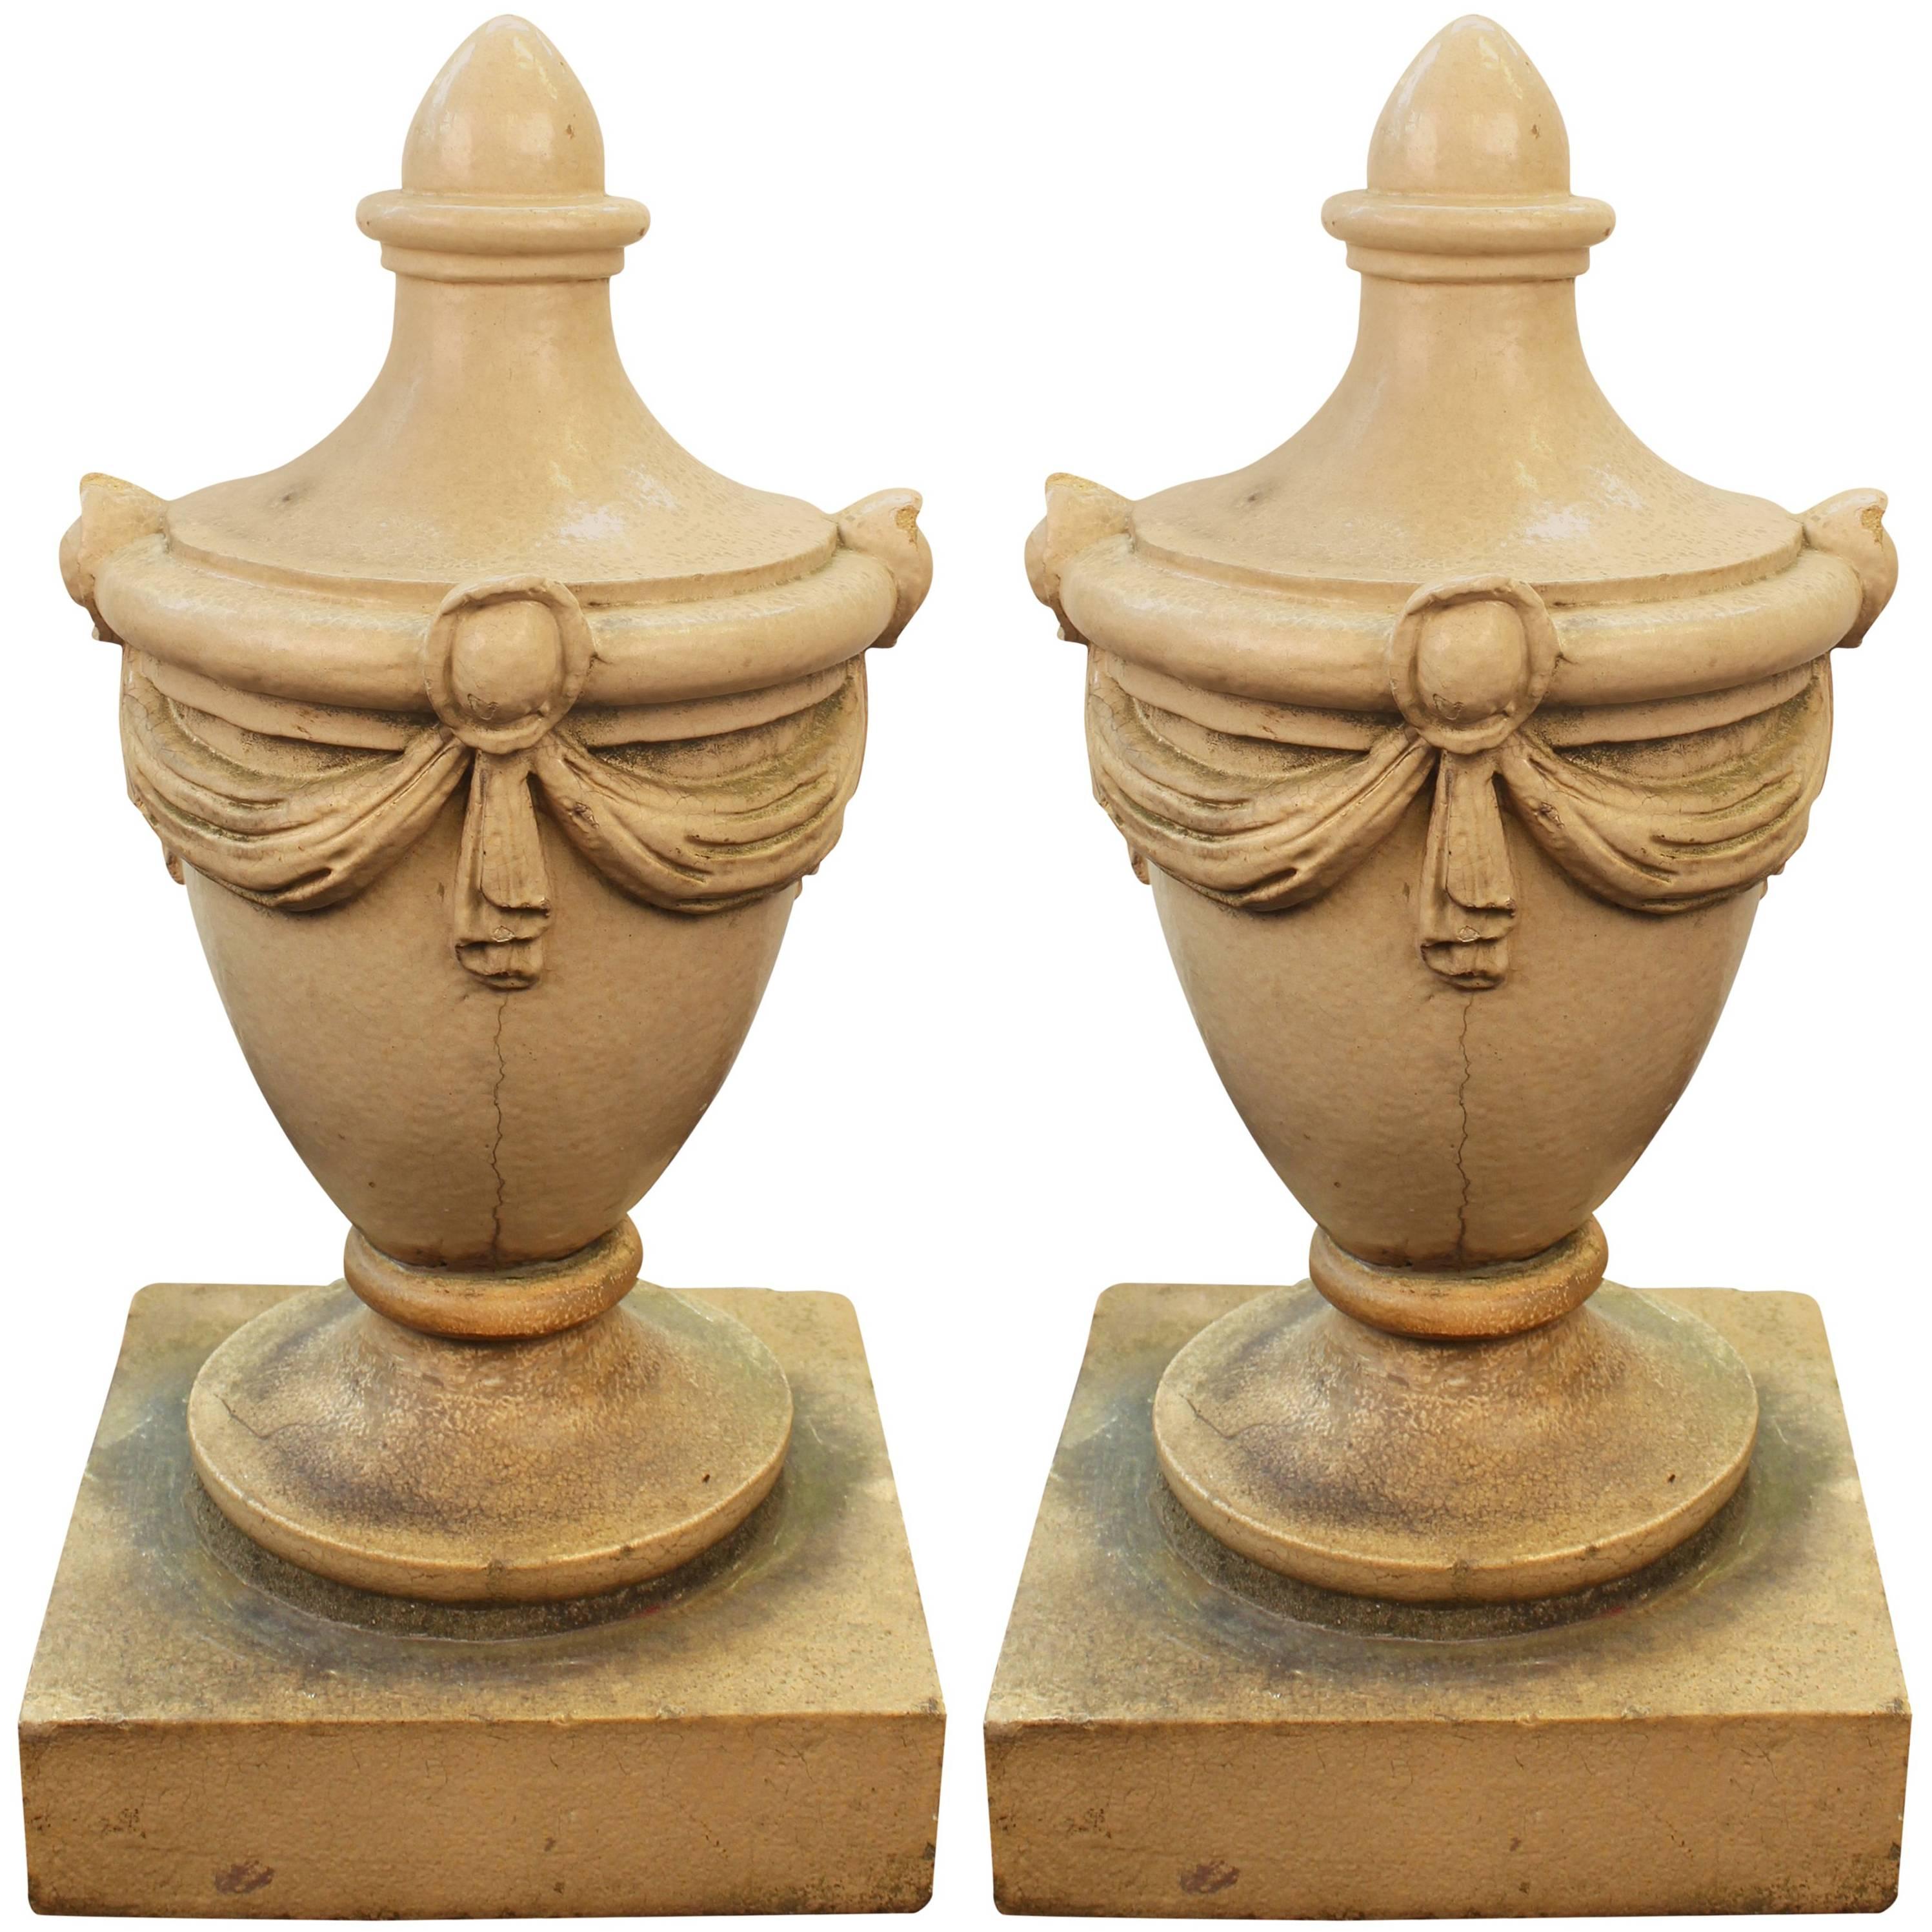 French Neoclassical Style Stone Urns